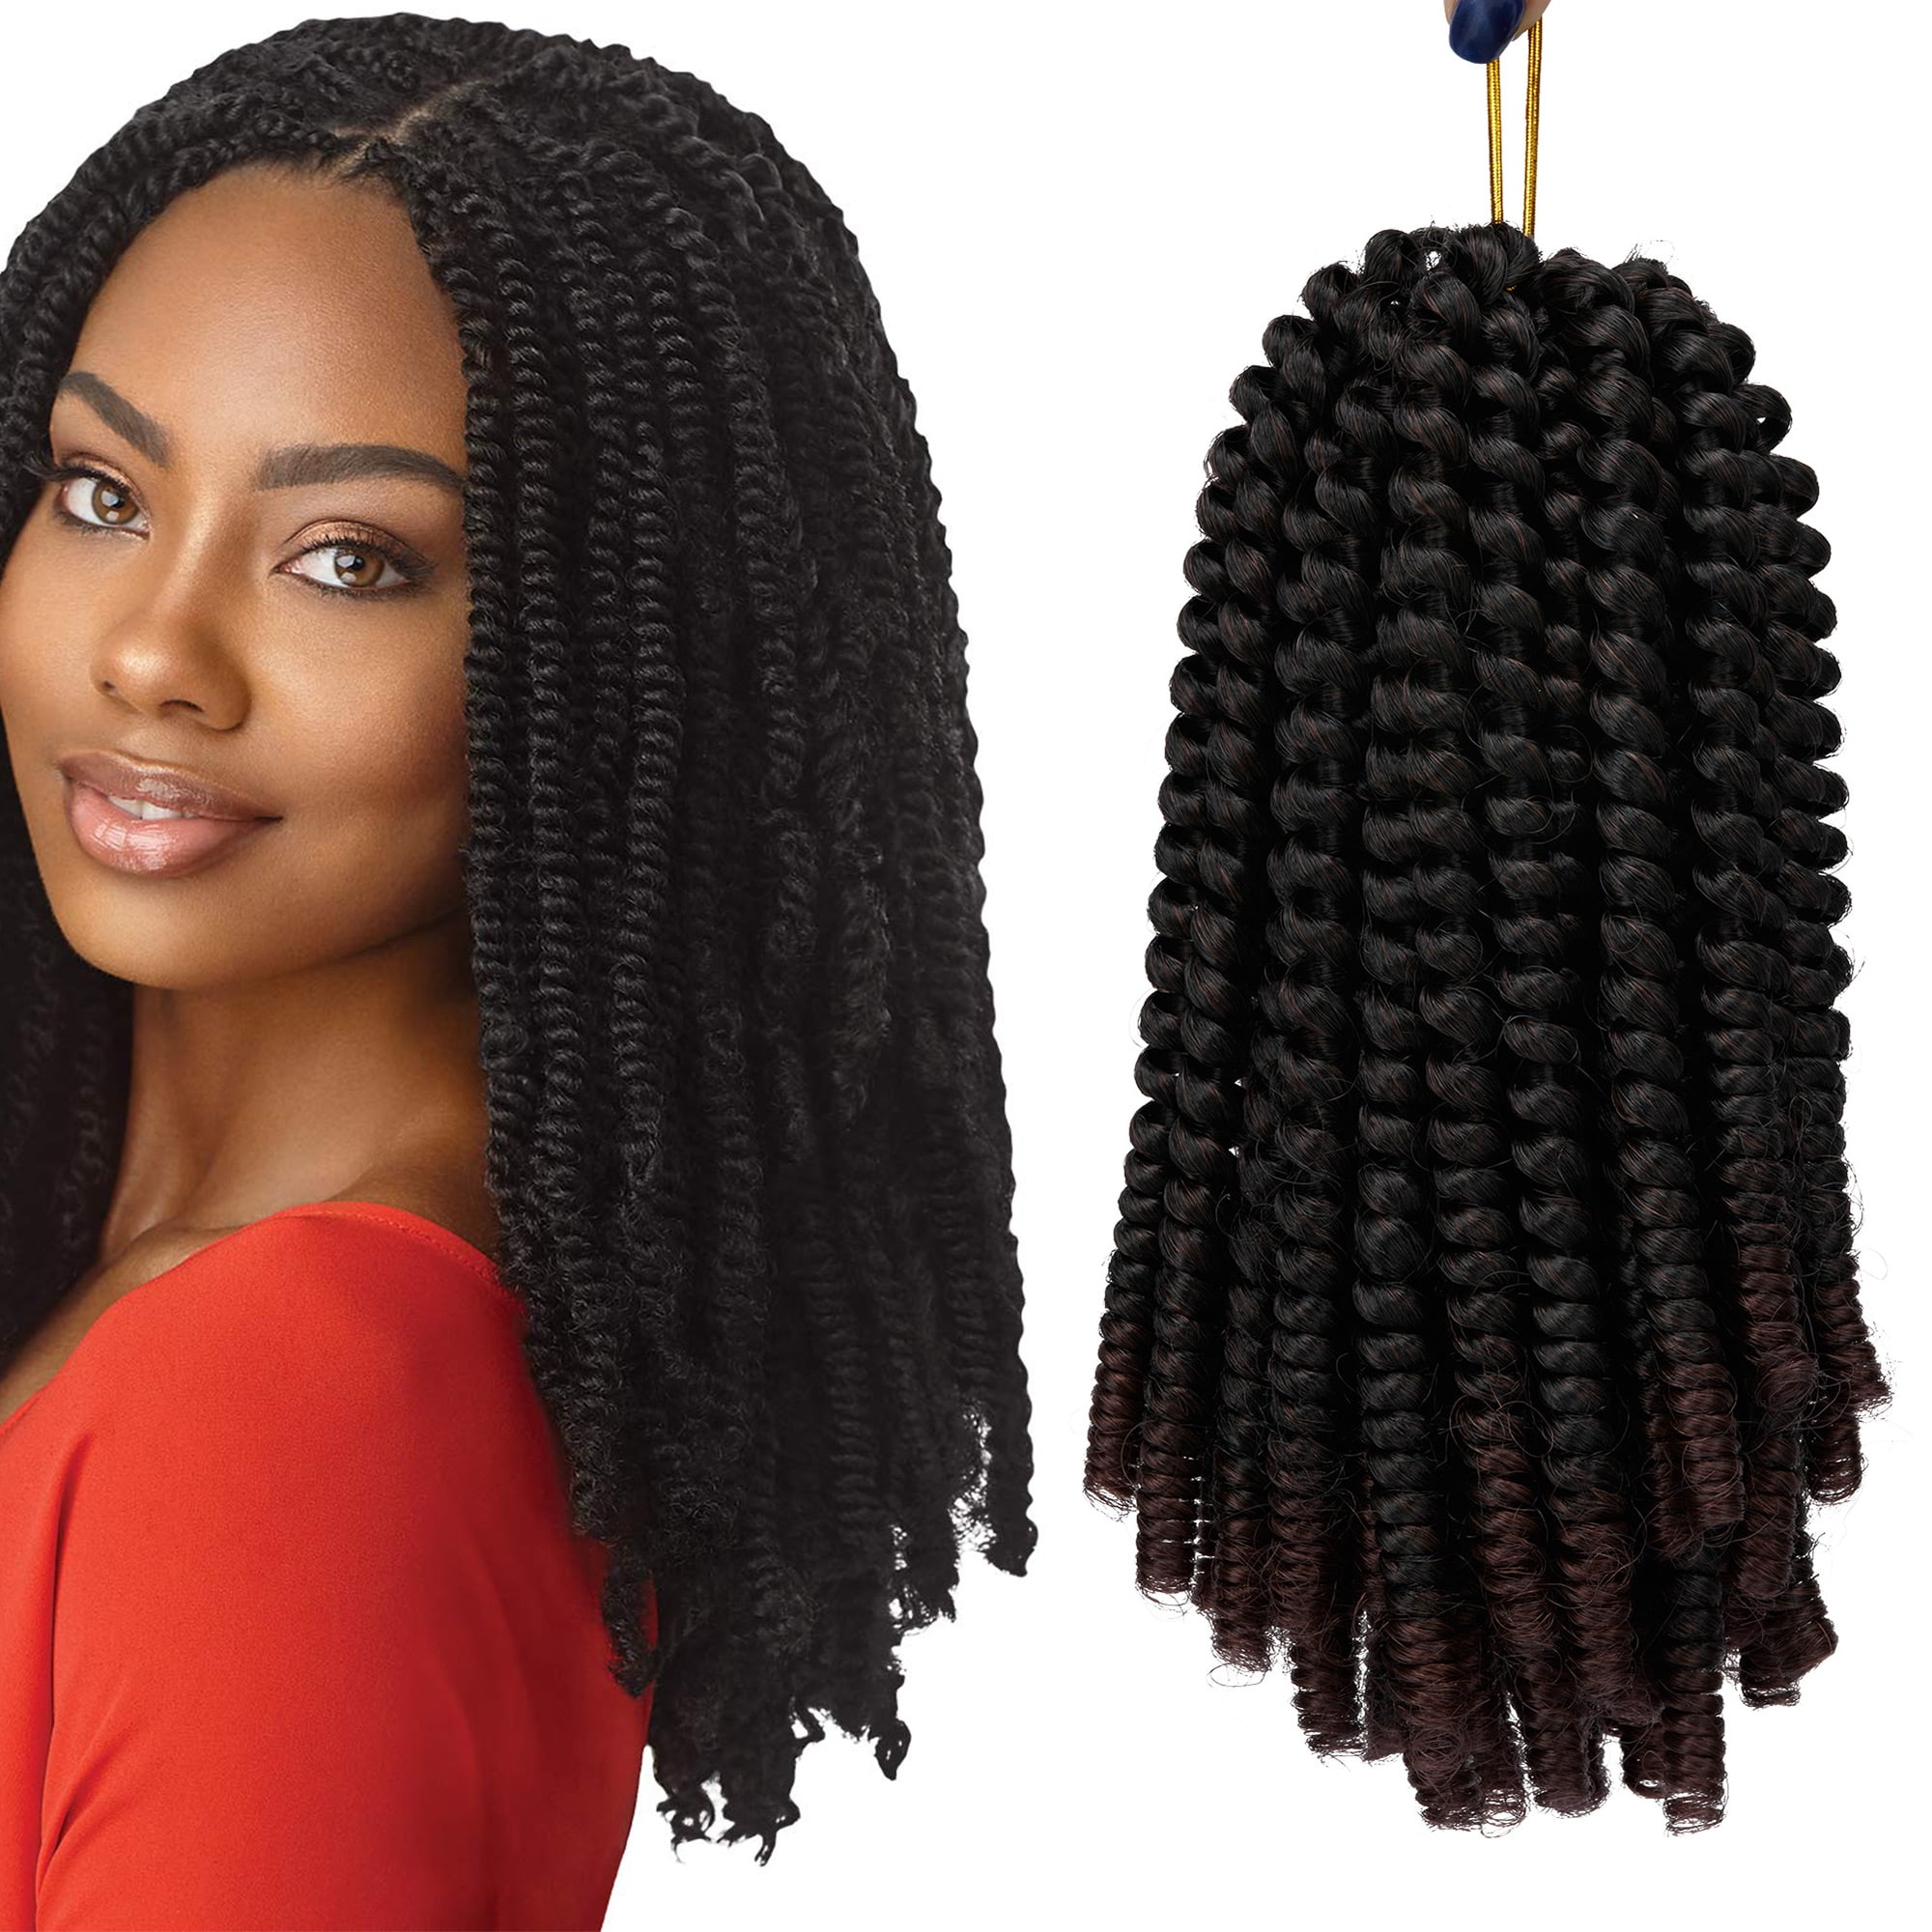 Spring Twist Hair for Braids 1 pack/lot 30strands Jamaican Bounce